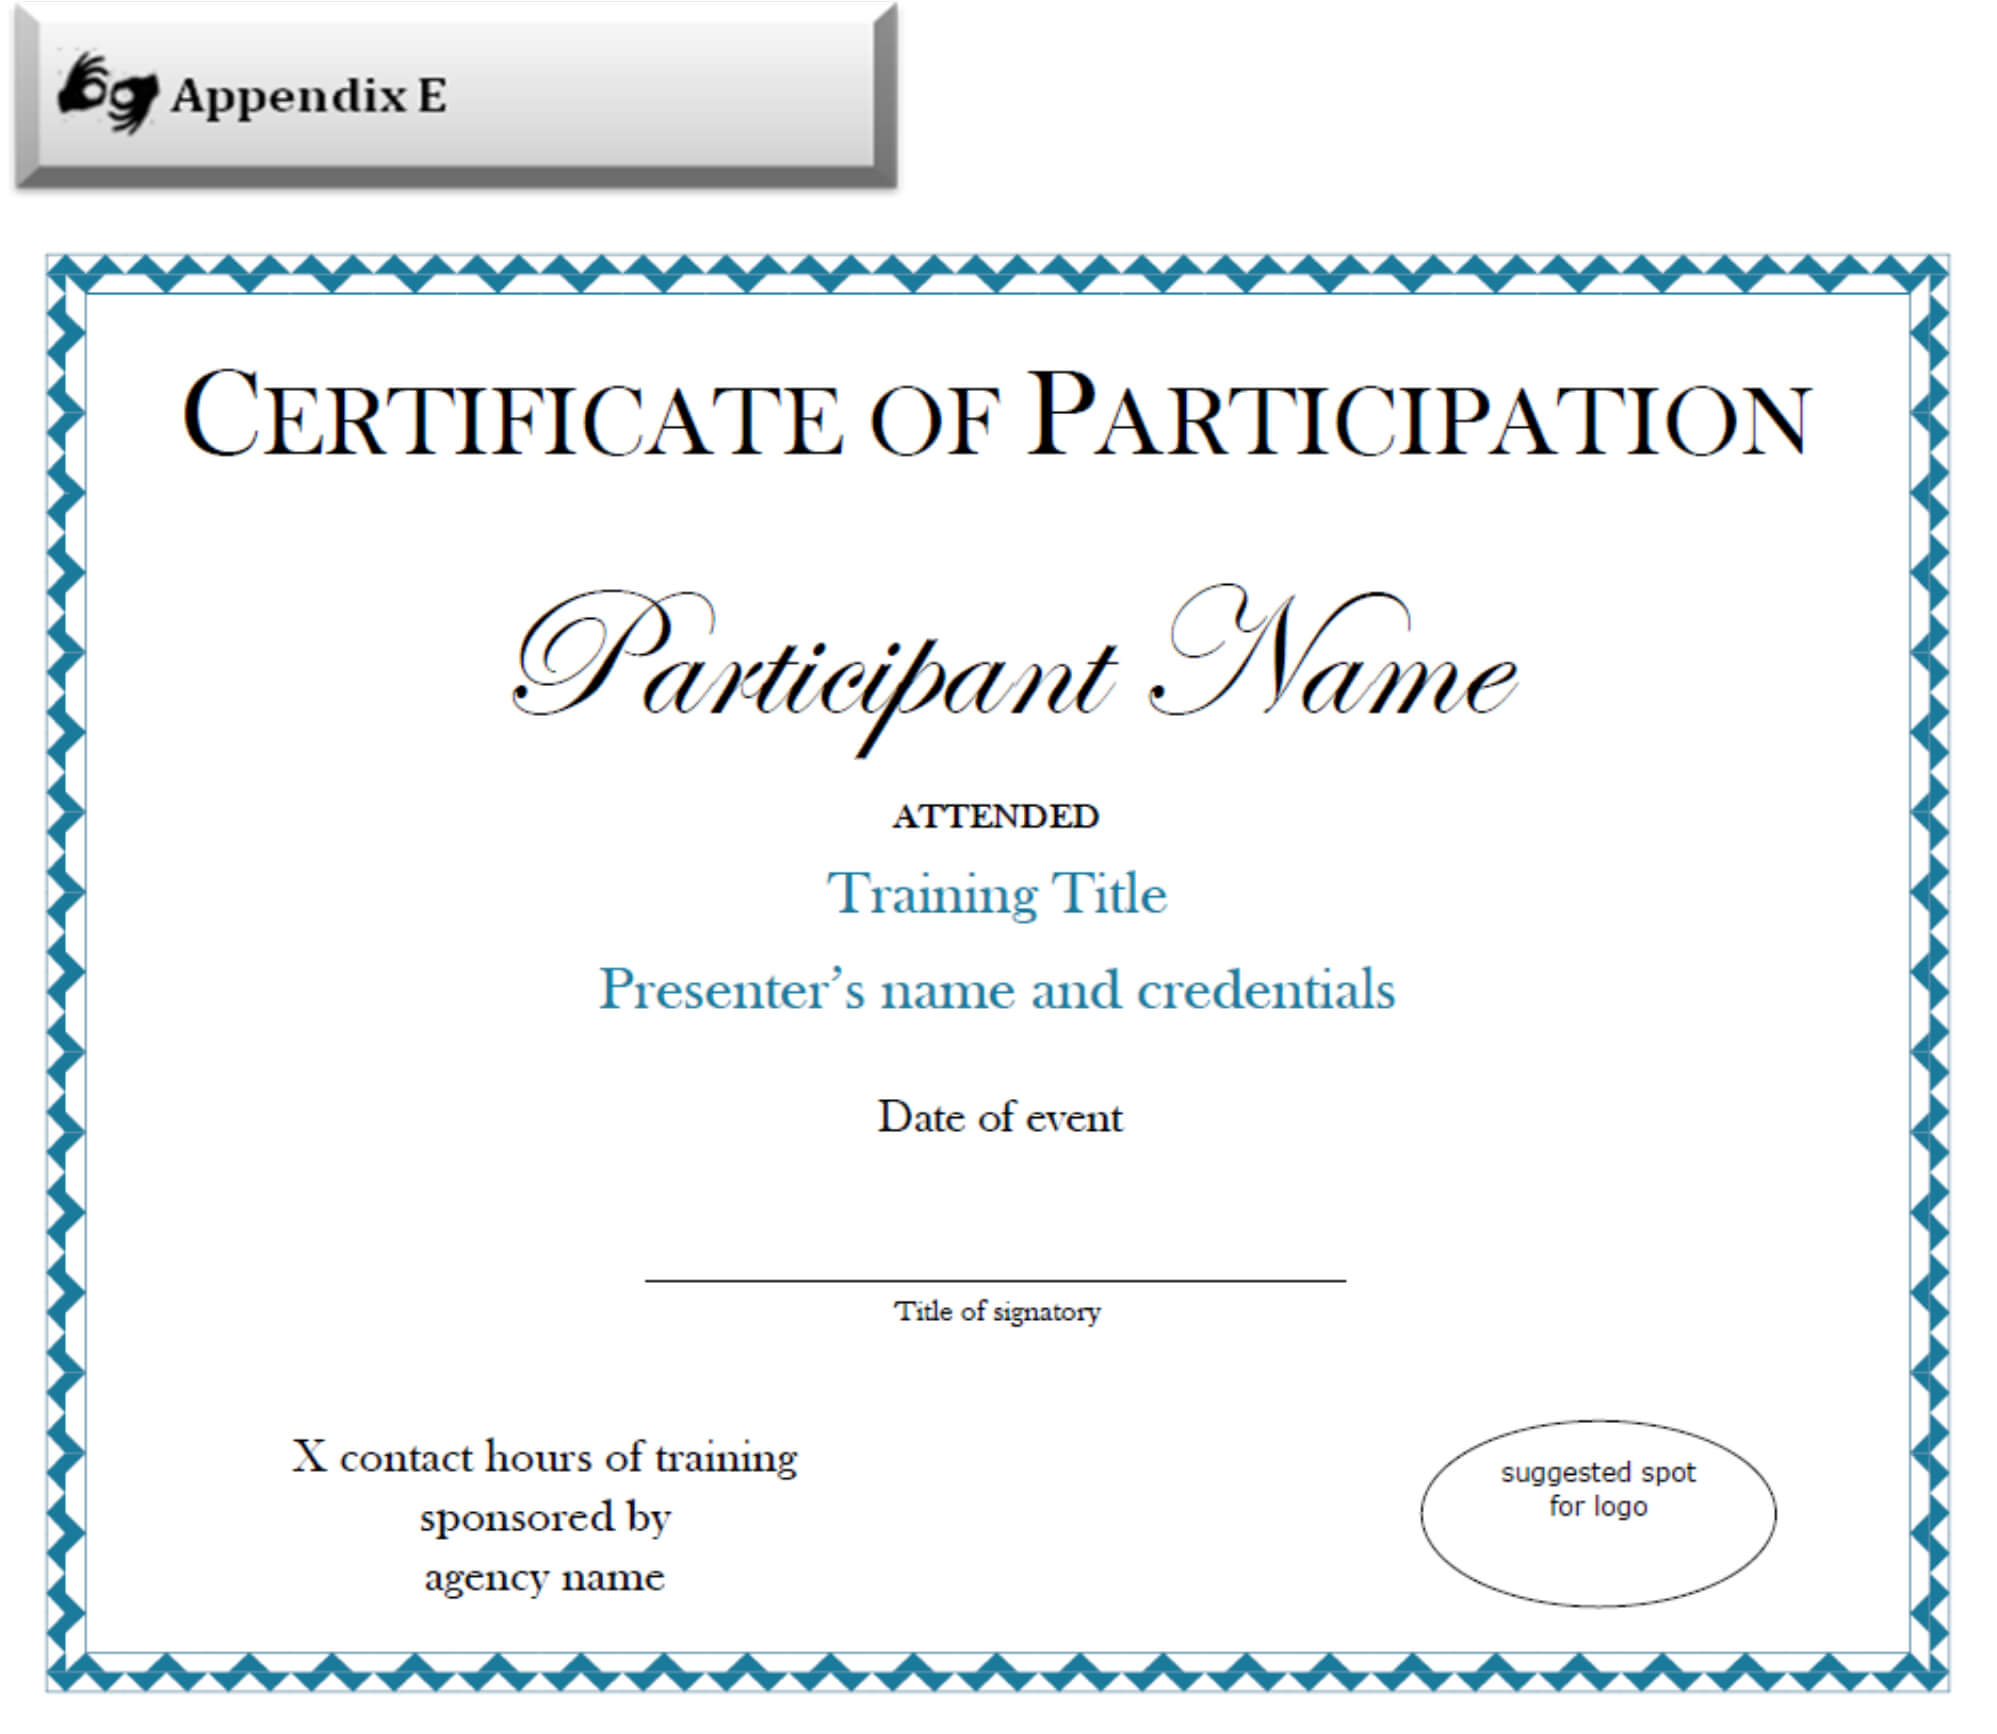 Certificate Of Participation Sample Free Download Within Certification Of Participation Free Template